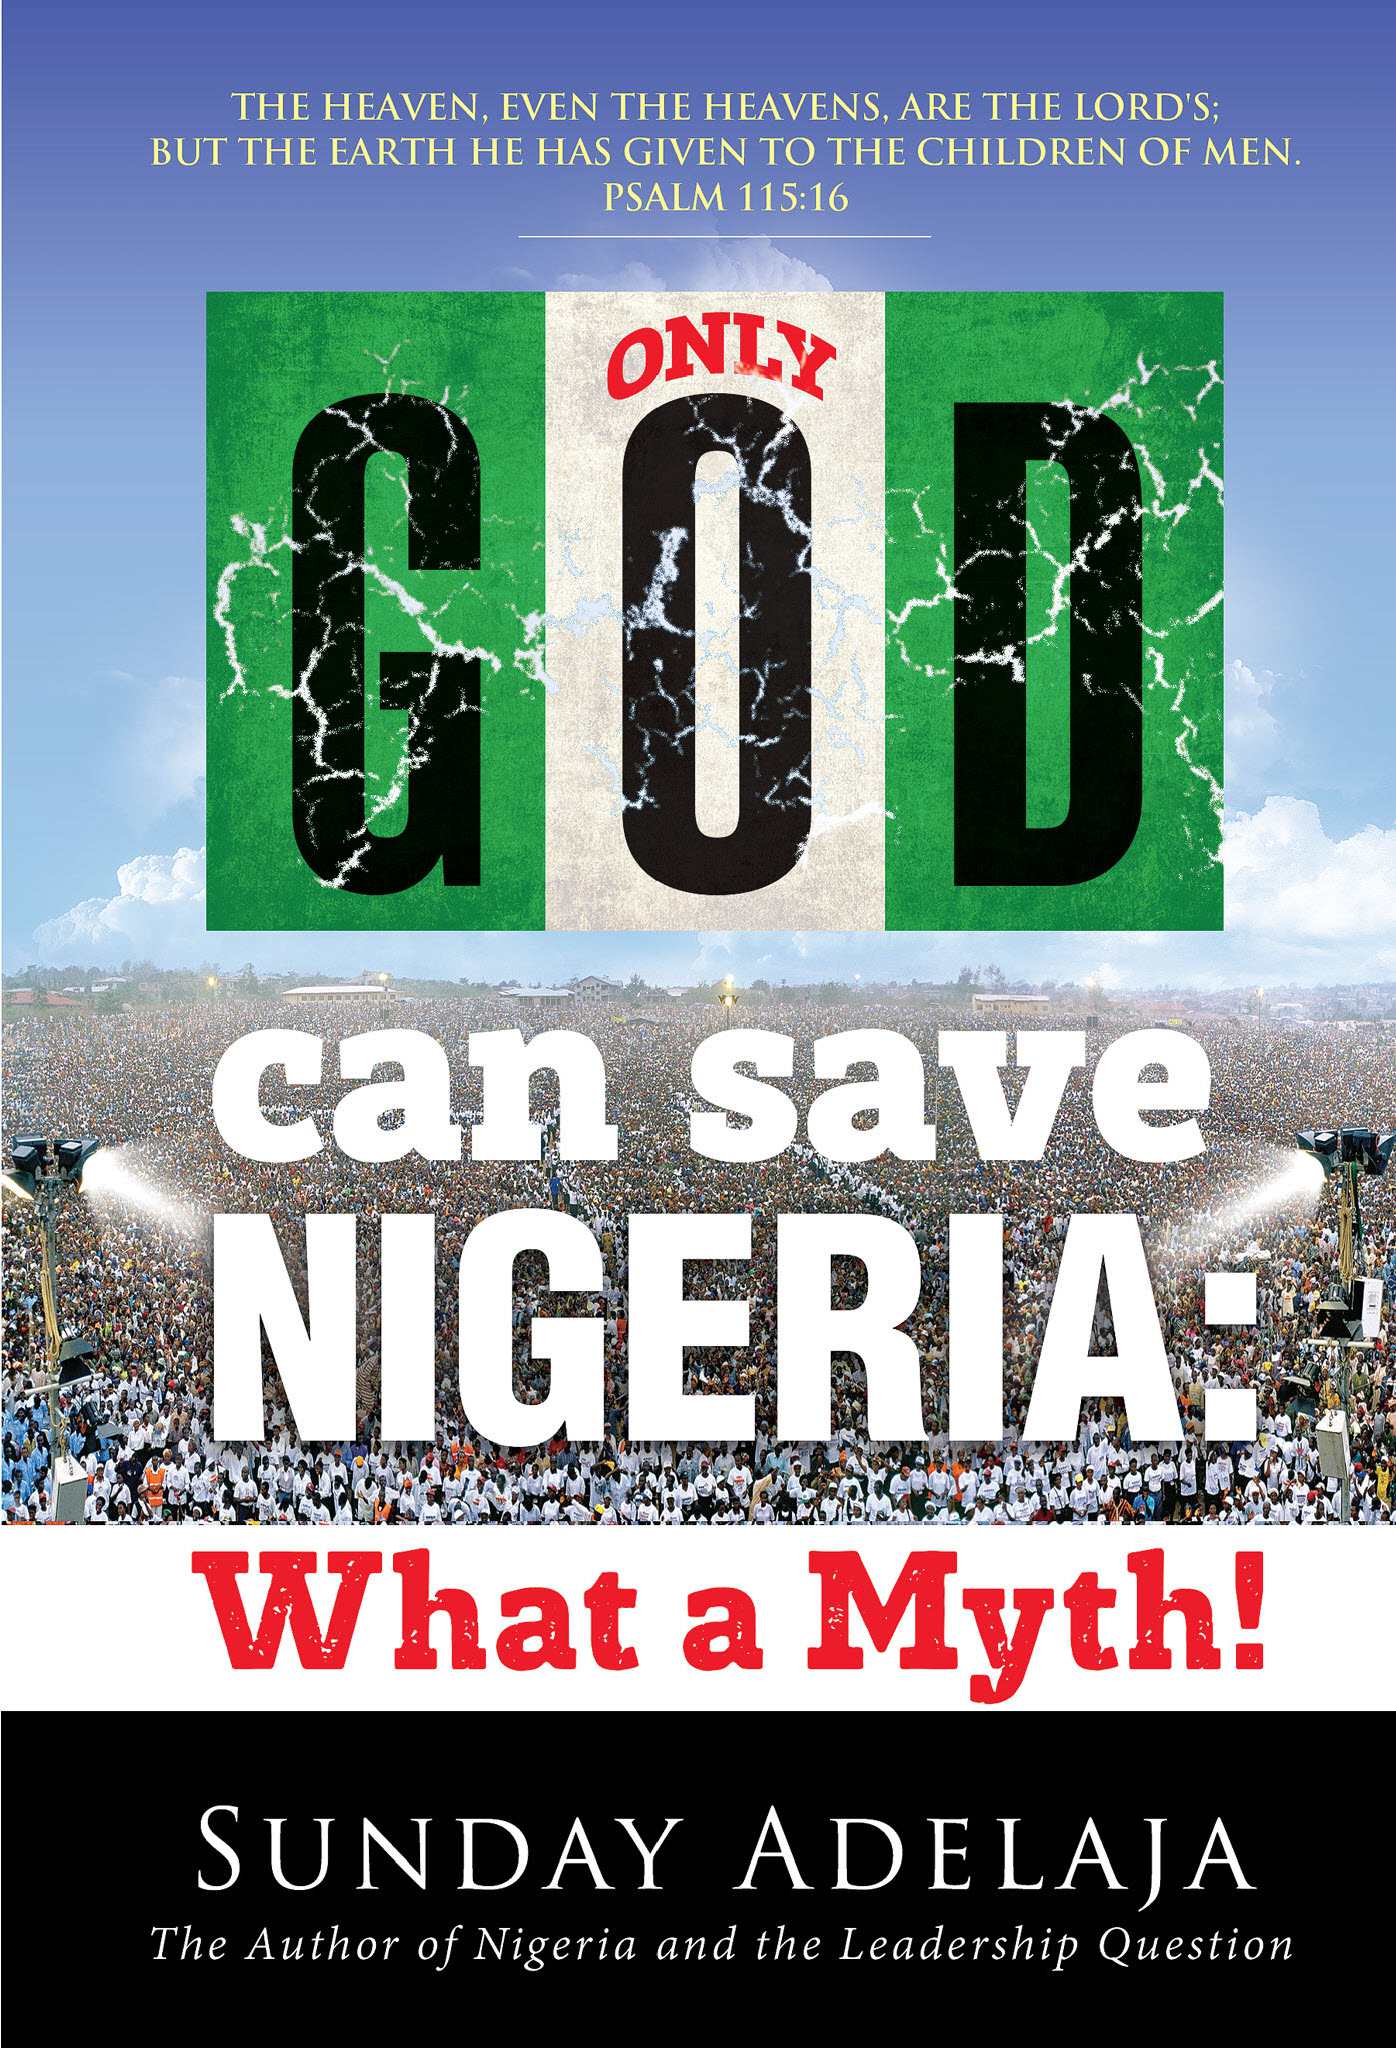 Only-God-can-save-Nigeria--what-a-myth!